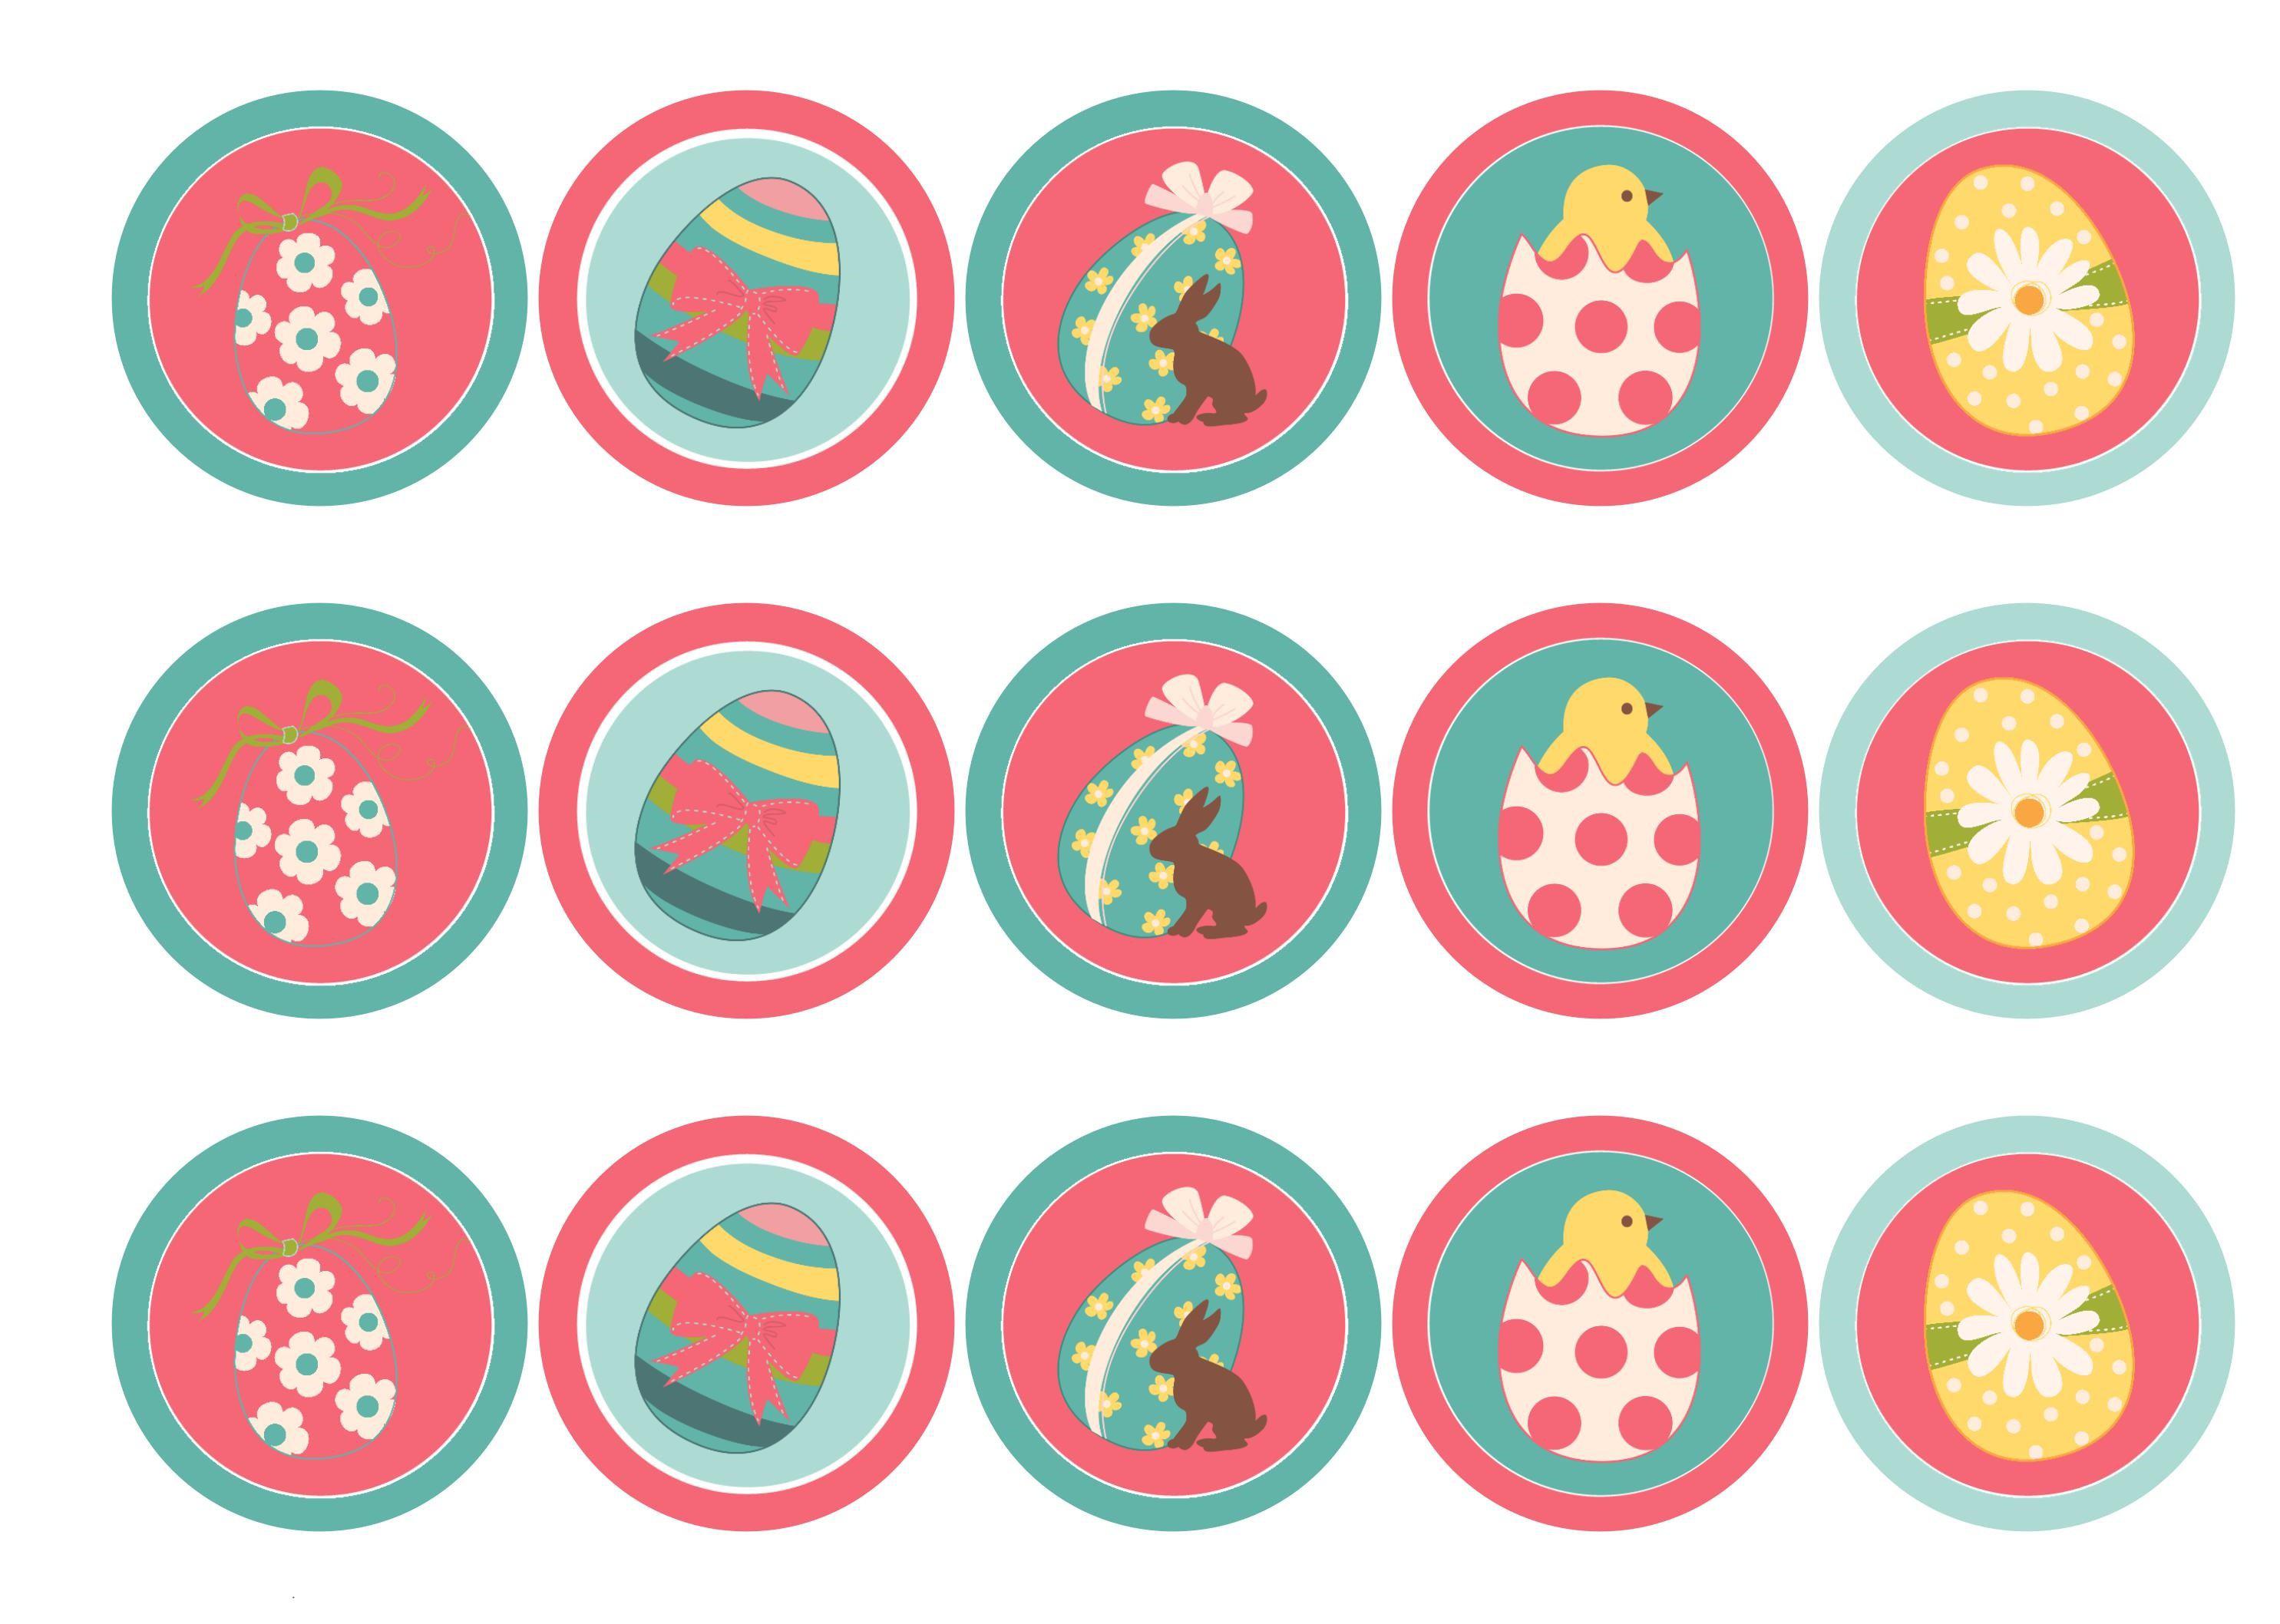 Edible cupcake toppers with pink and aqua Easter Egg designs